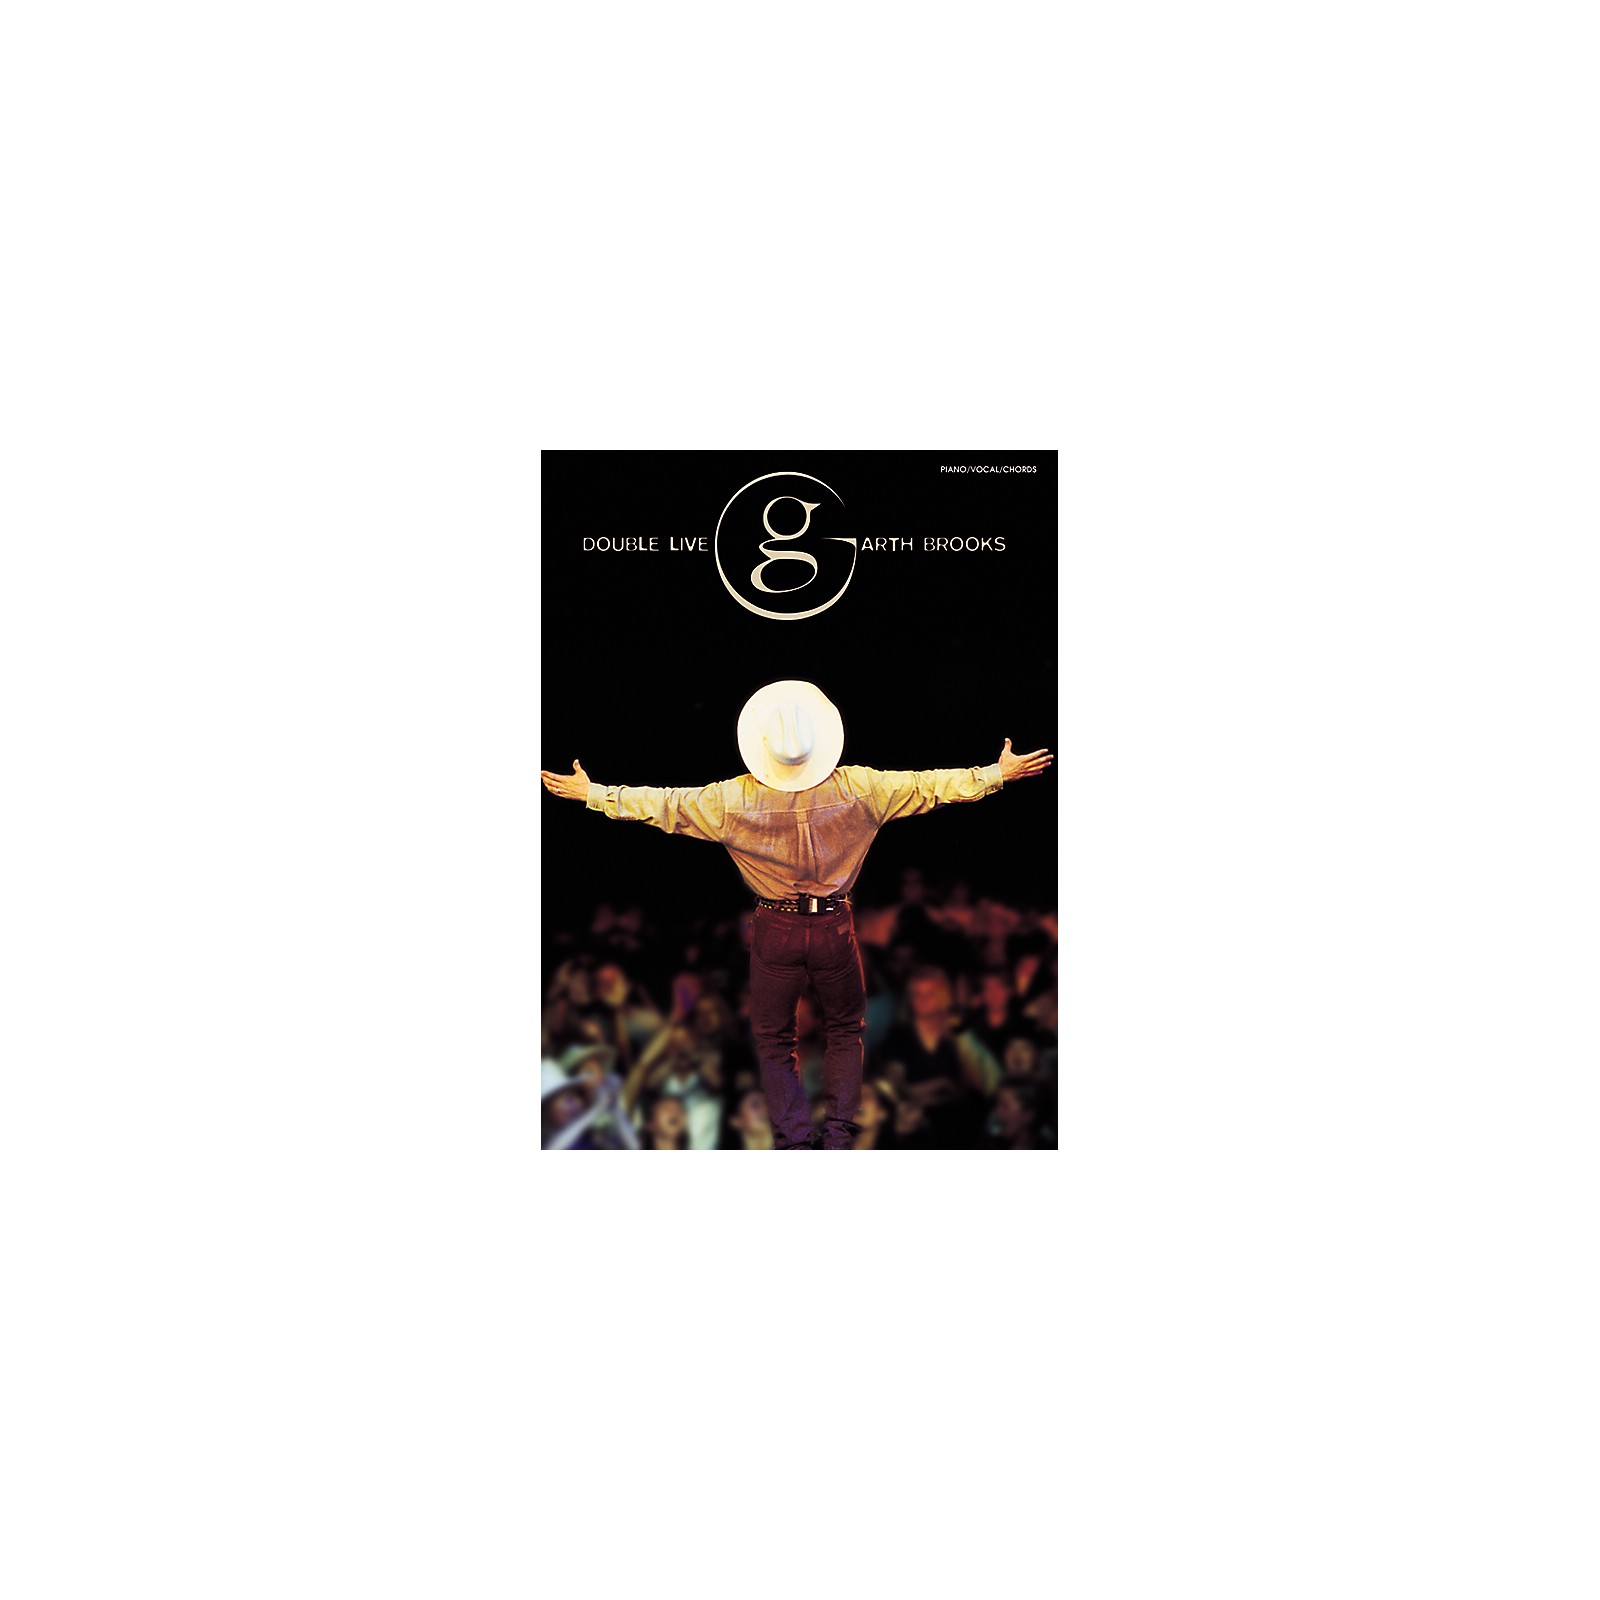 https://media.musicarts.com/is/image/MMGS7/Garth-Brooks--Double-Live-Piano-Vocal-Guitar-Songbook/901664000000000-00-1600x1600.jpg